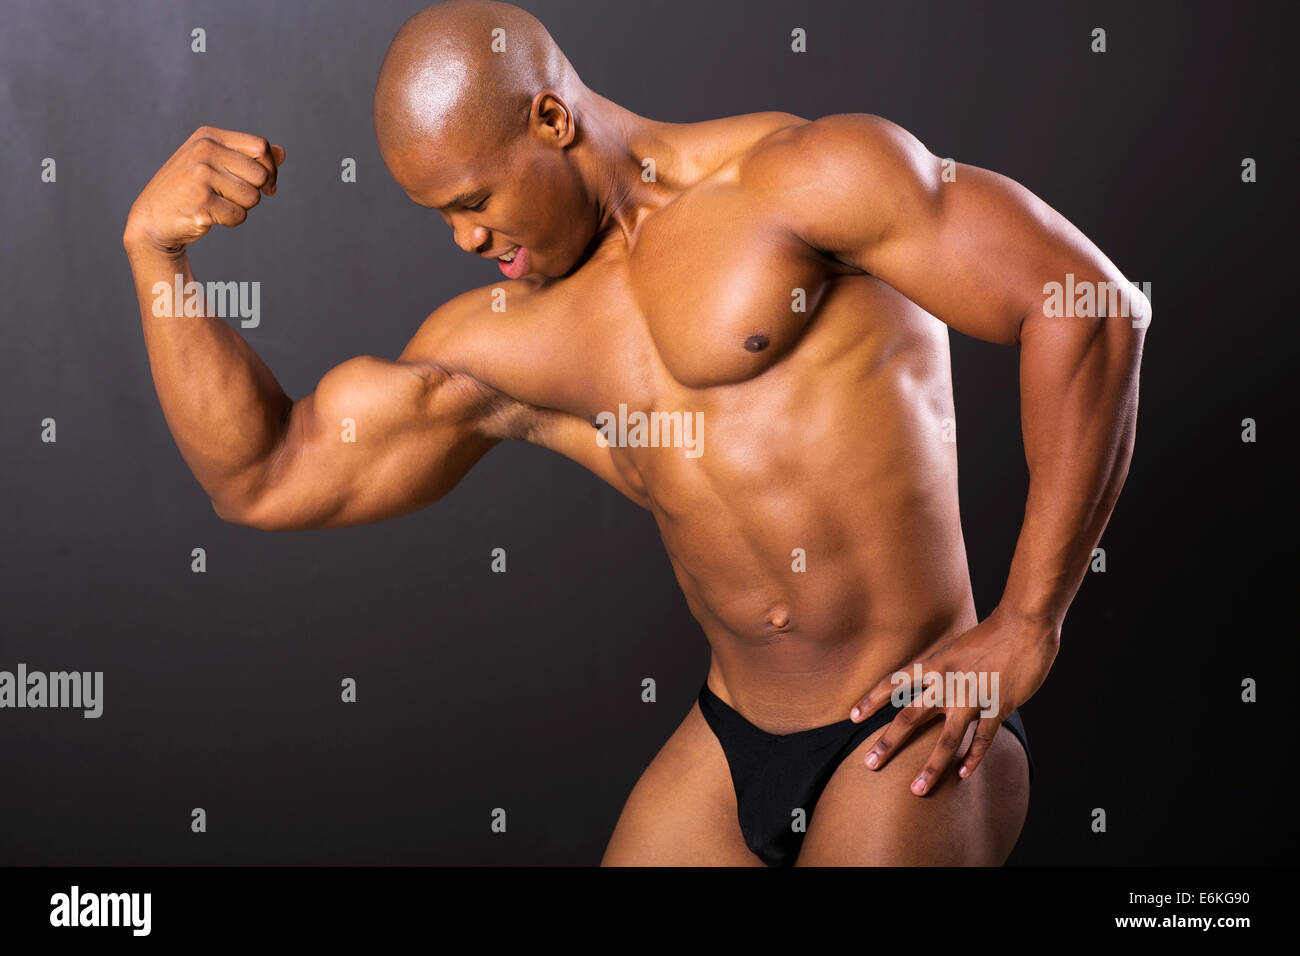 33146 African Muscle Man Images, Stock Photos & Vectors